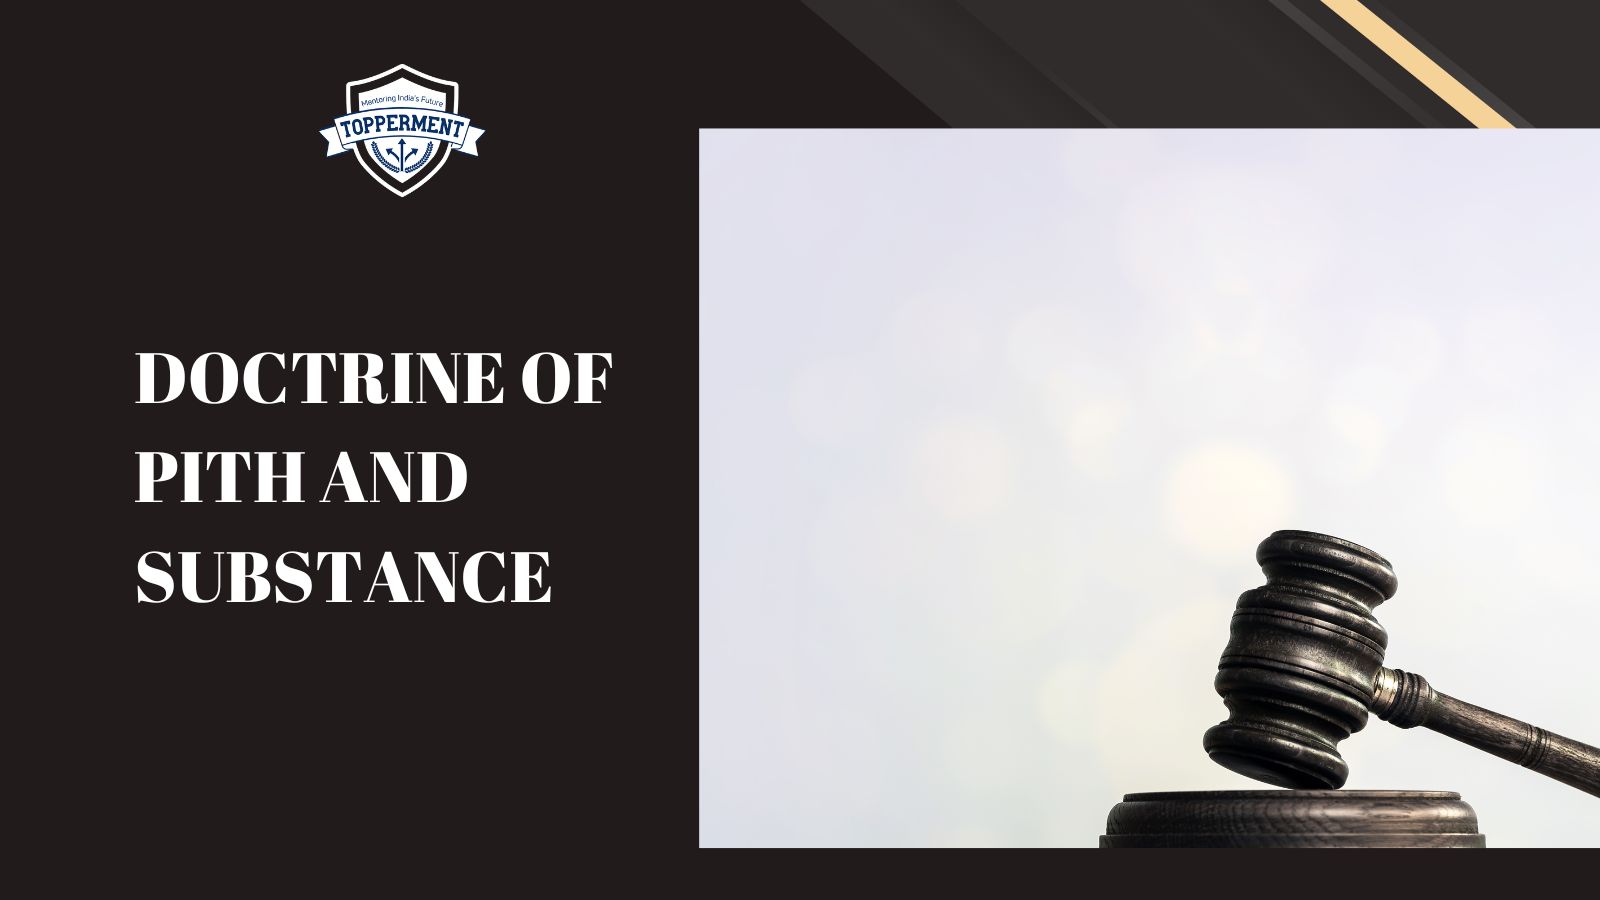 What Is The Doctrine Of Pith and Substance? | Best UPSC IAS Coaching For Mentorship And Guidance